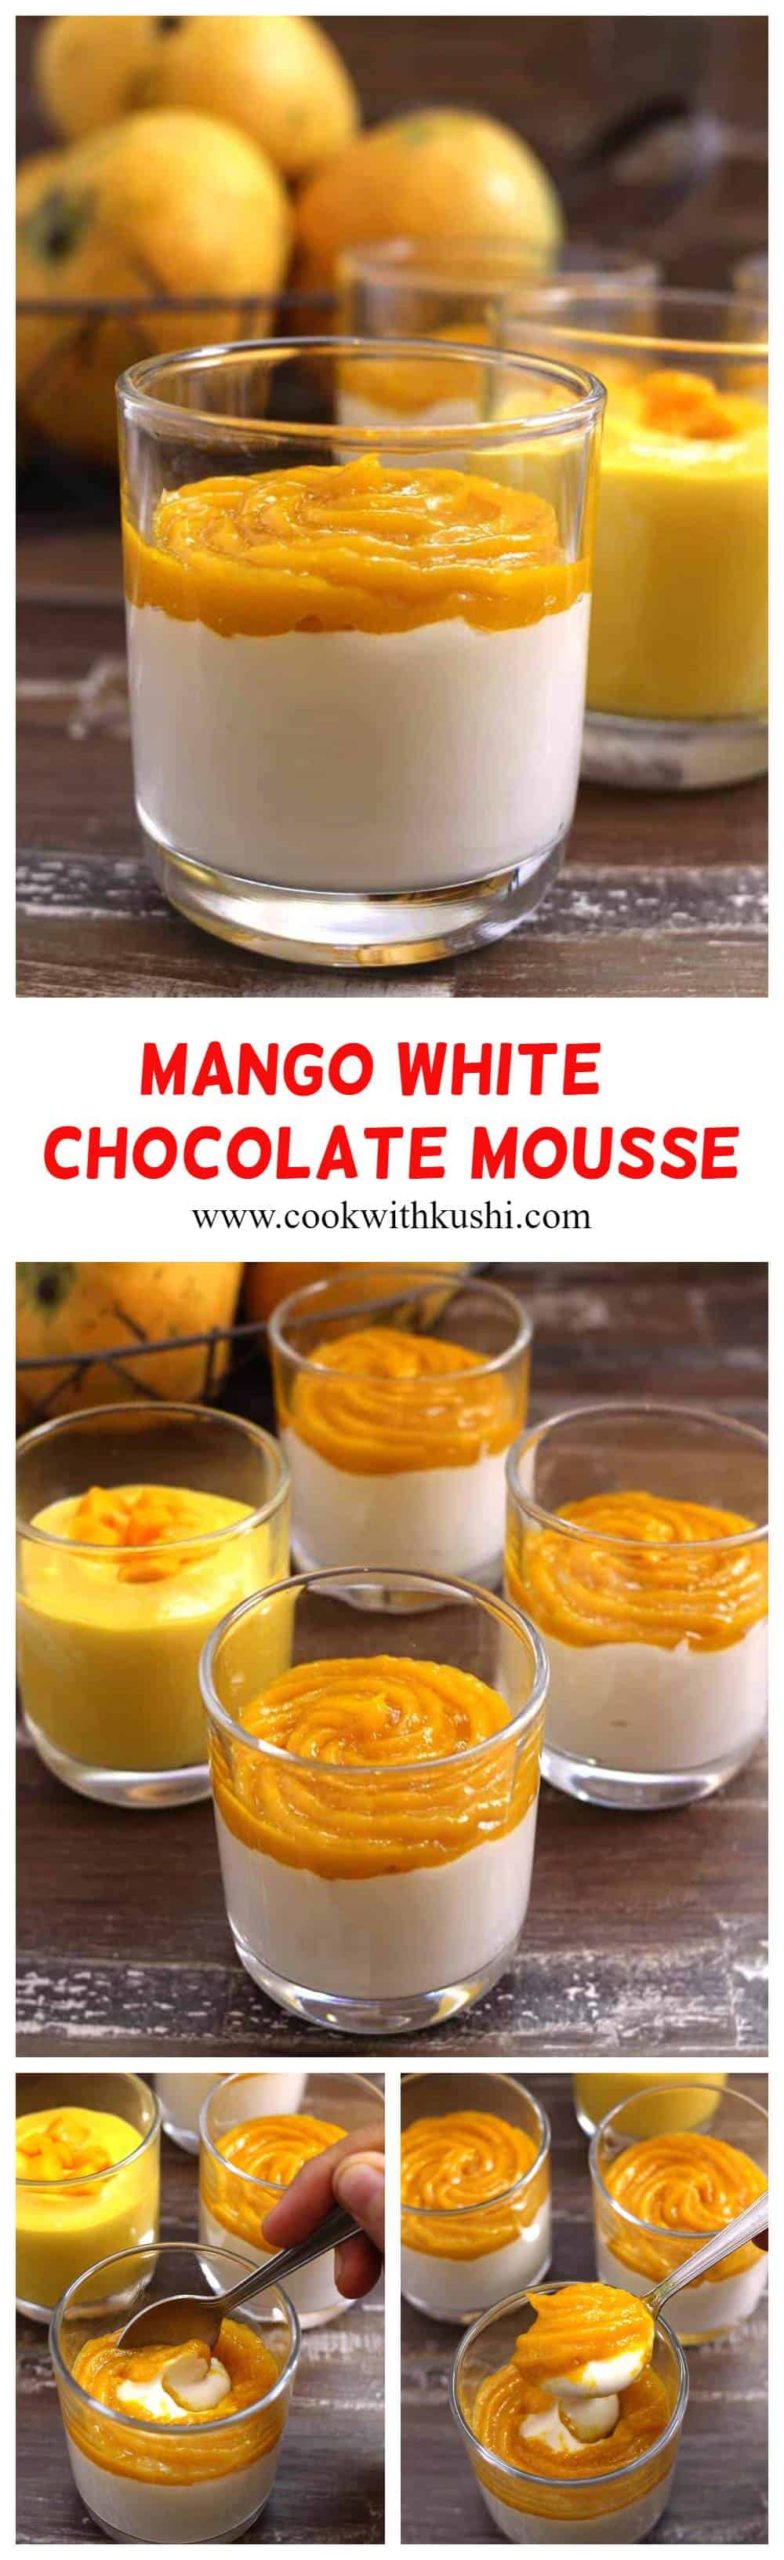 Easy Mango White Chocolate Mousse or Mousse Au Chocolat Mangue is super simple to make, light and airy,  melt in mouth fancy dessert with delicious fruity flavor prepared using just 5 ingredients. A perfect treat for all mango and chocolate lovers. #mousse #egglessmousse #whitechocolate #Milkchocolate #darkchoclate #puddingdesserts #mango #mangorecipes #summerfood #holidaydessert #4thofjulyfood #Makeaheaddessert #Nobakedesserts #fancydessert 